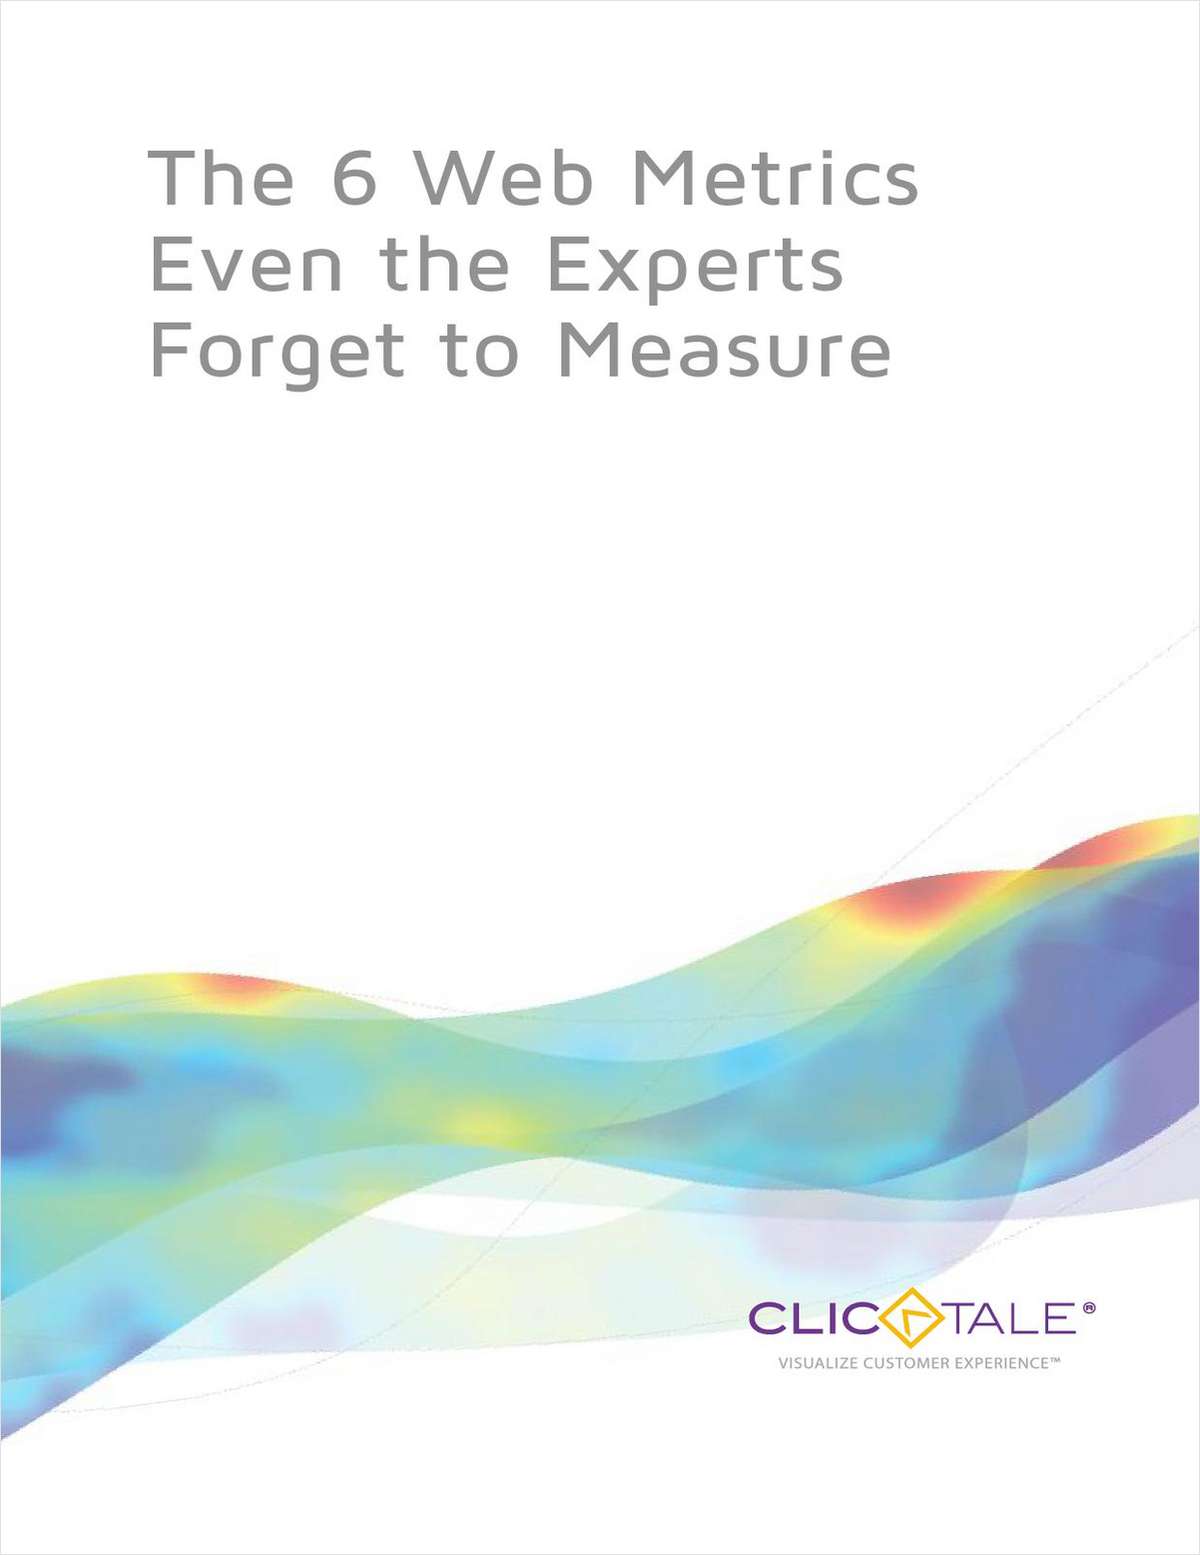 The 6 Web Metrics Even the Experts Forget to Measure